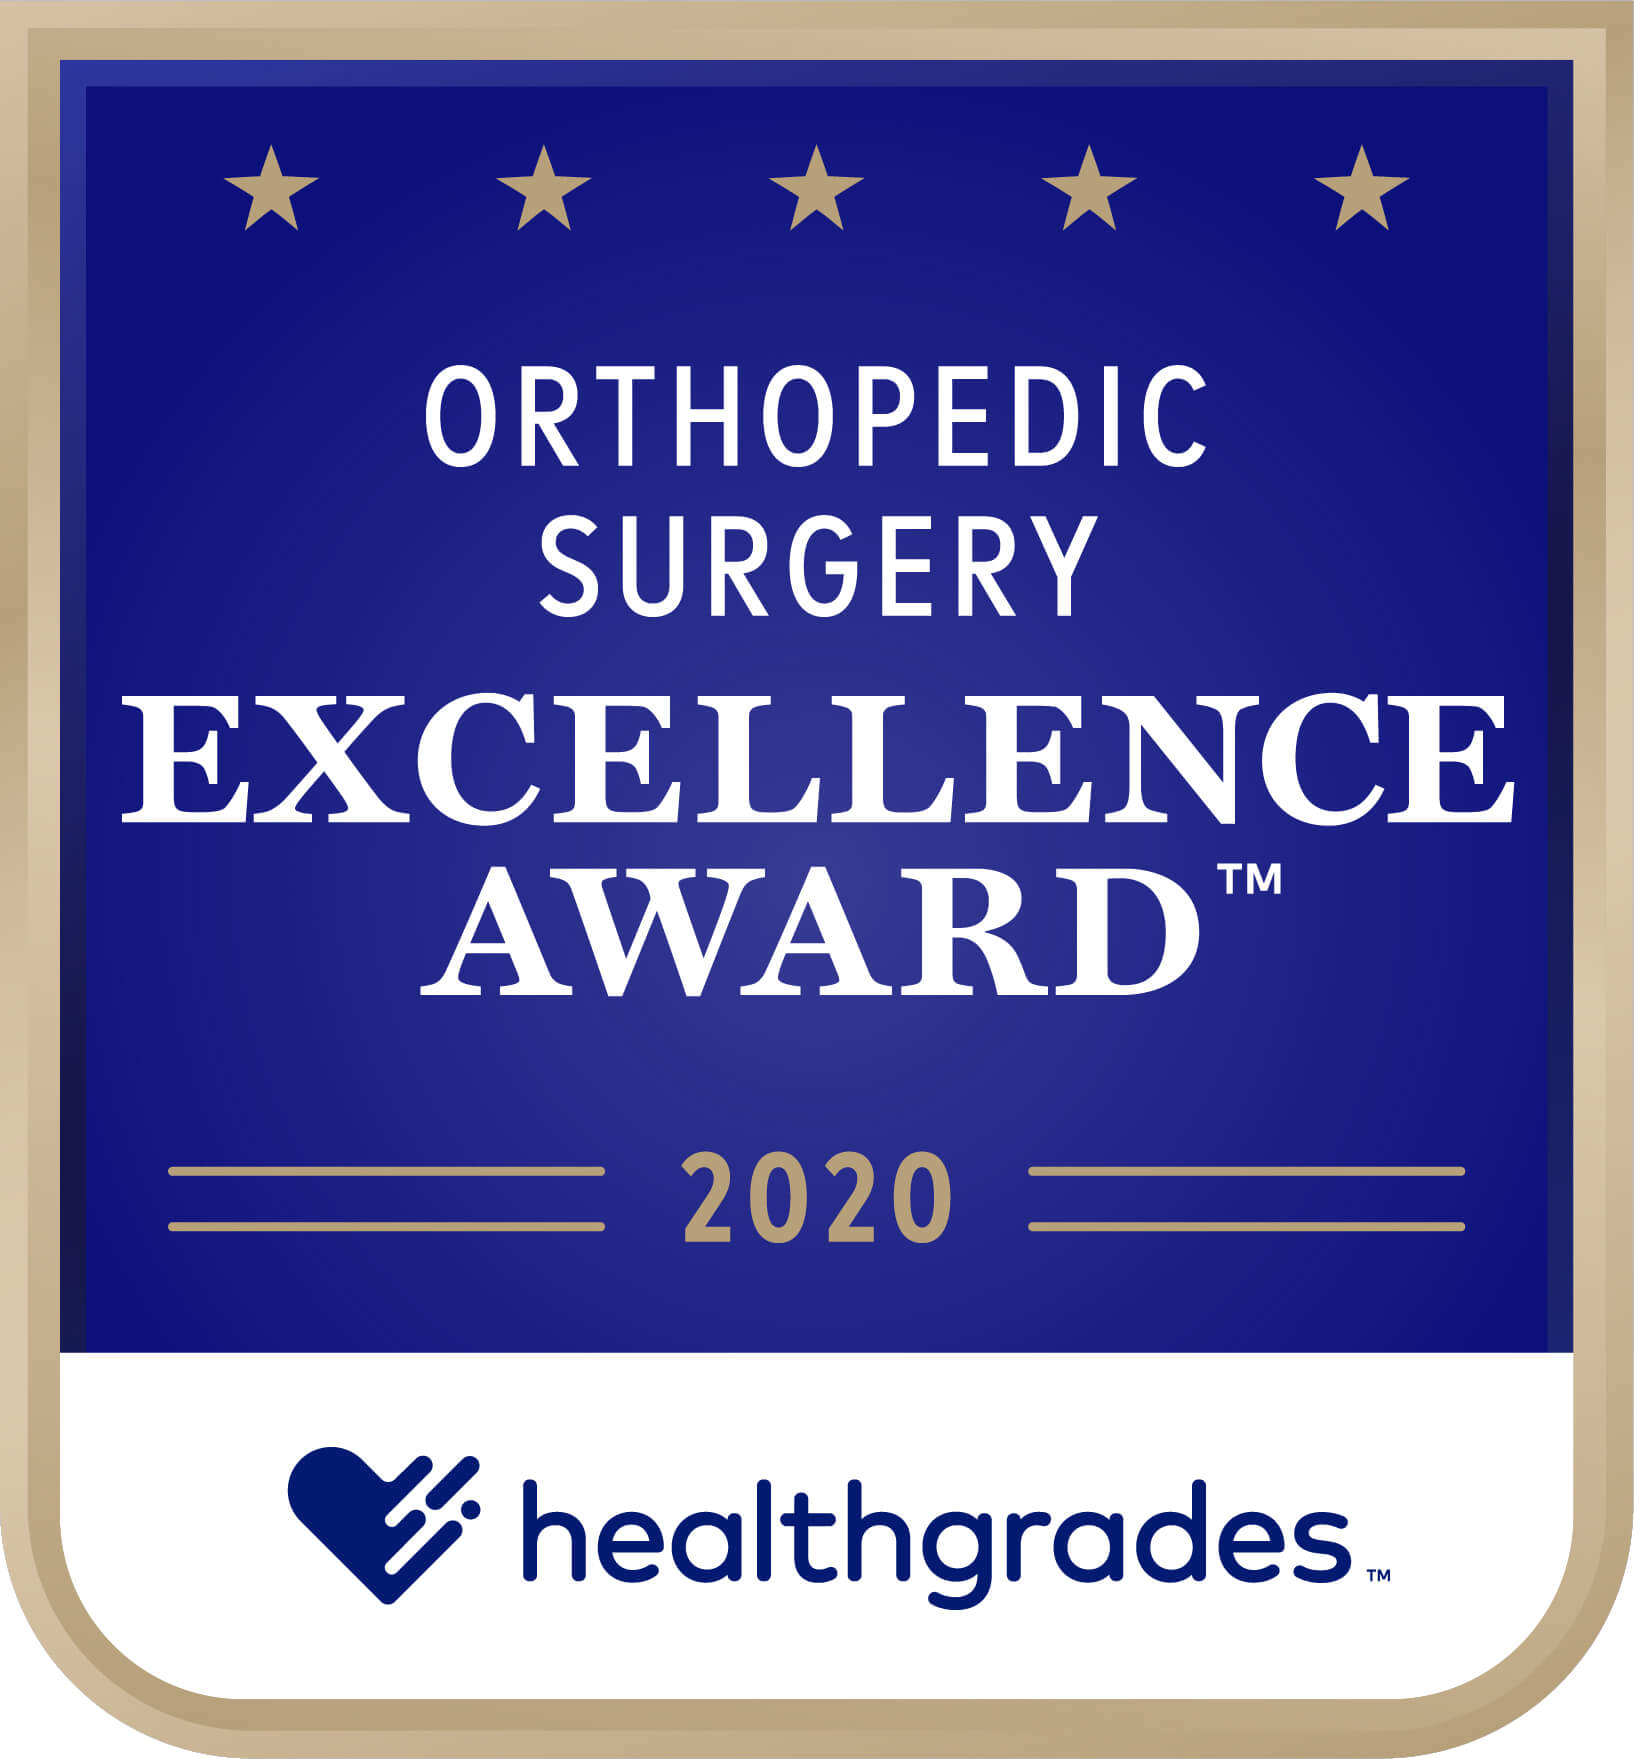 Healthgrades Excellence Award for Orthopedic Surgery 2020